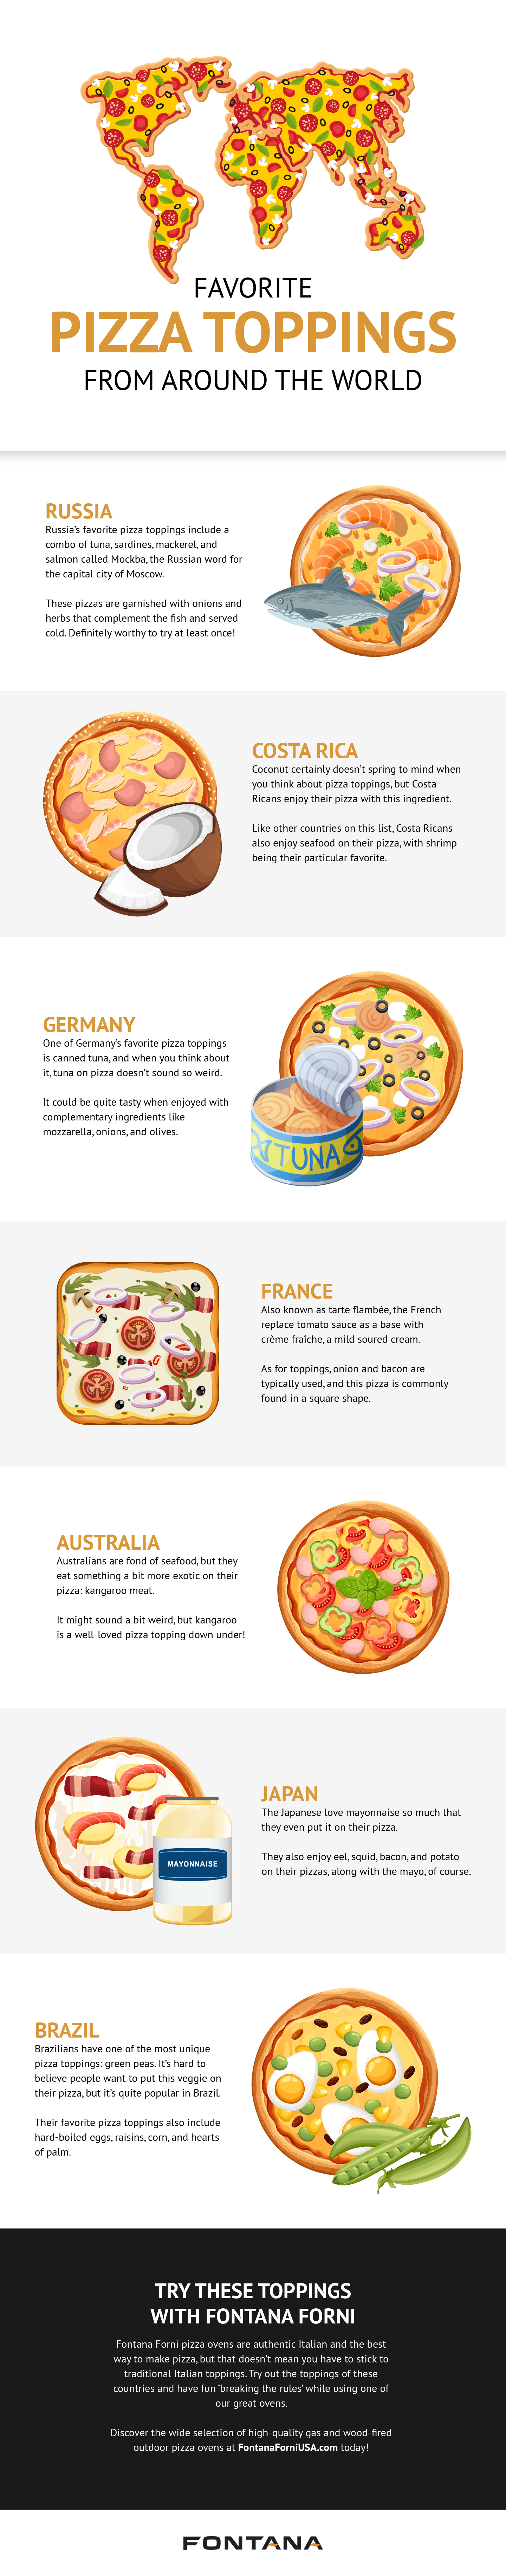 Anvendelse Anoi Ombord What Are The Favorite Pizza Topping from Around the World? – Fontana Forni  USA